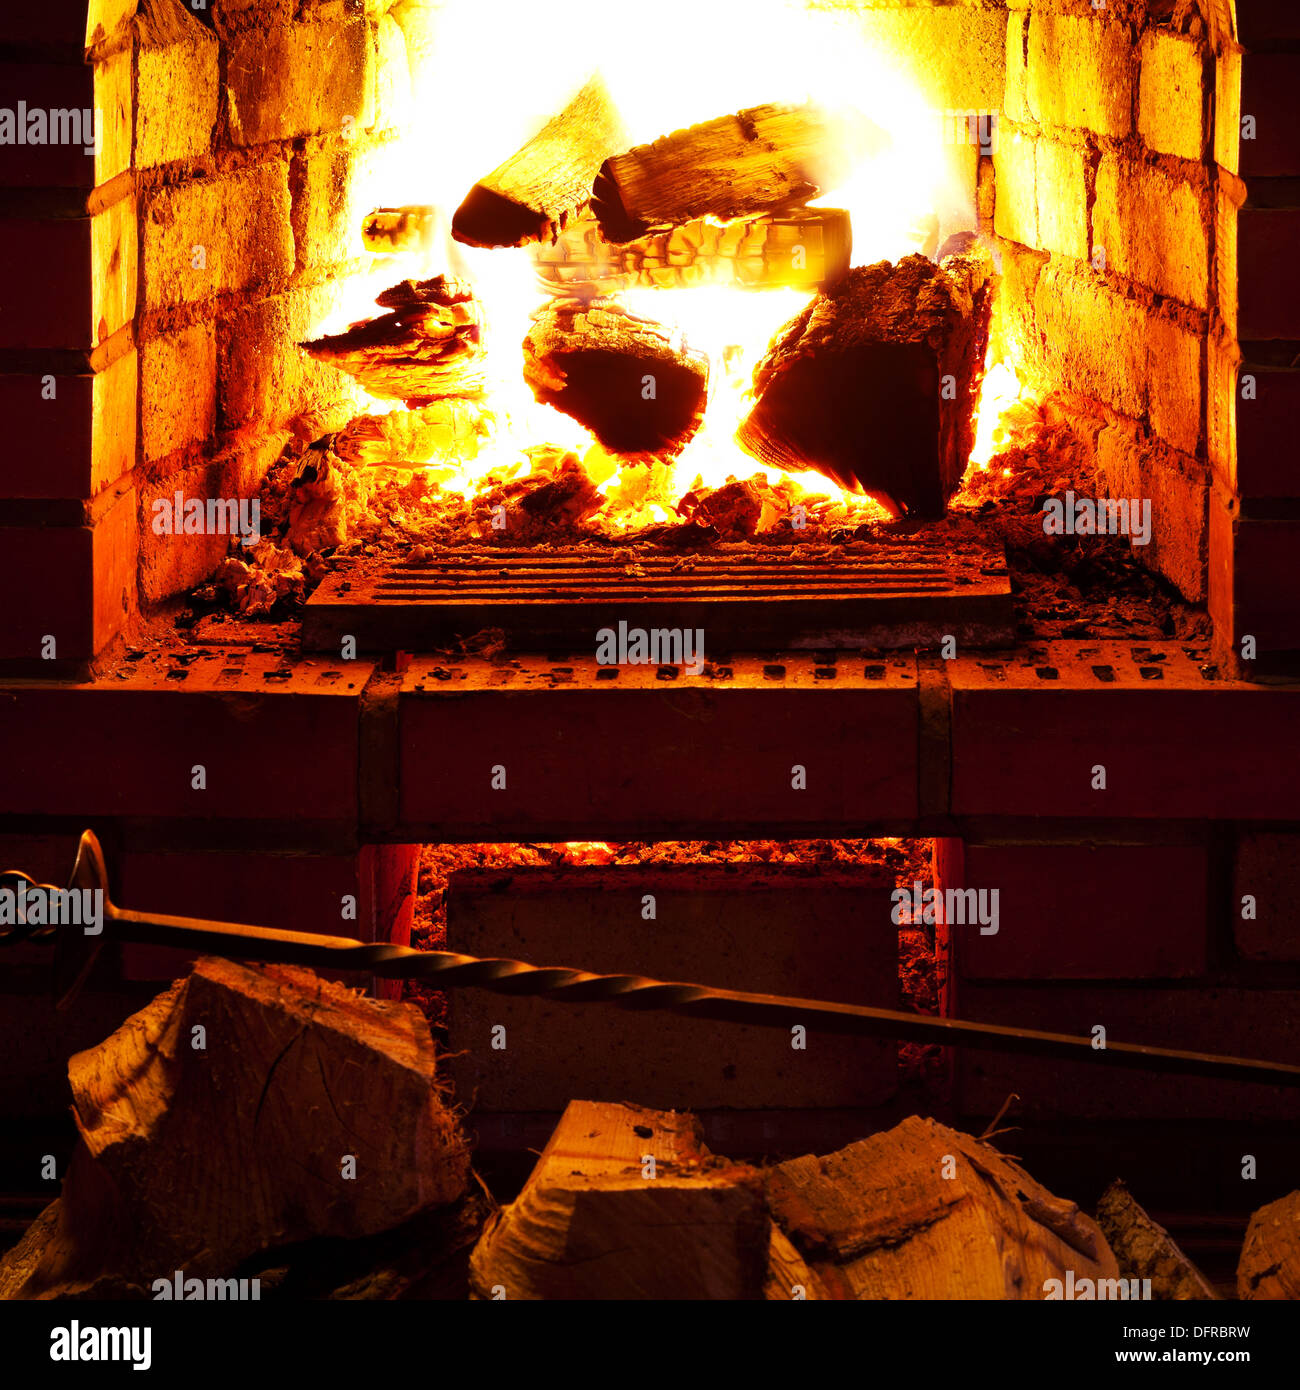 poker, firewood and near fireplace in evening time Stock Photo